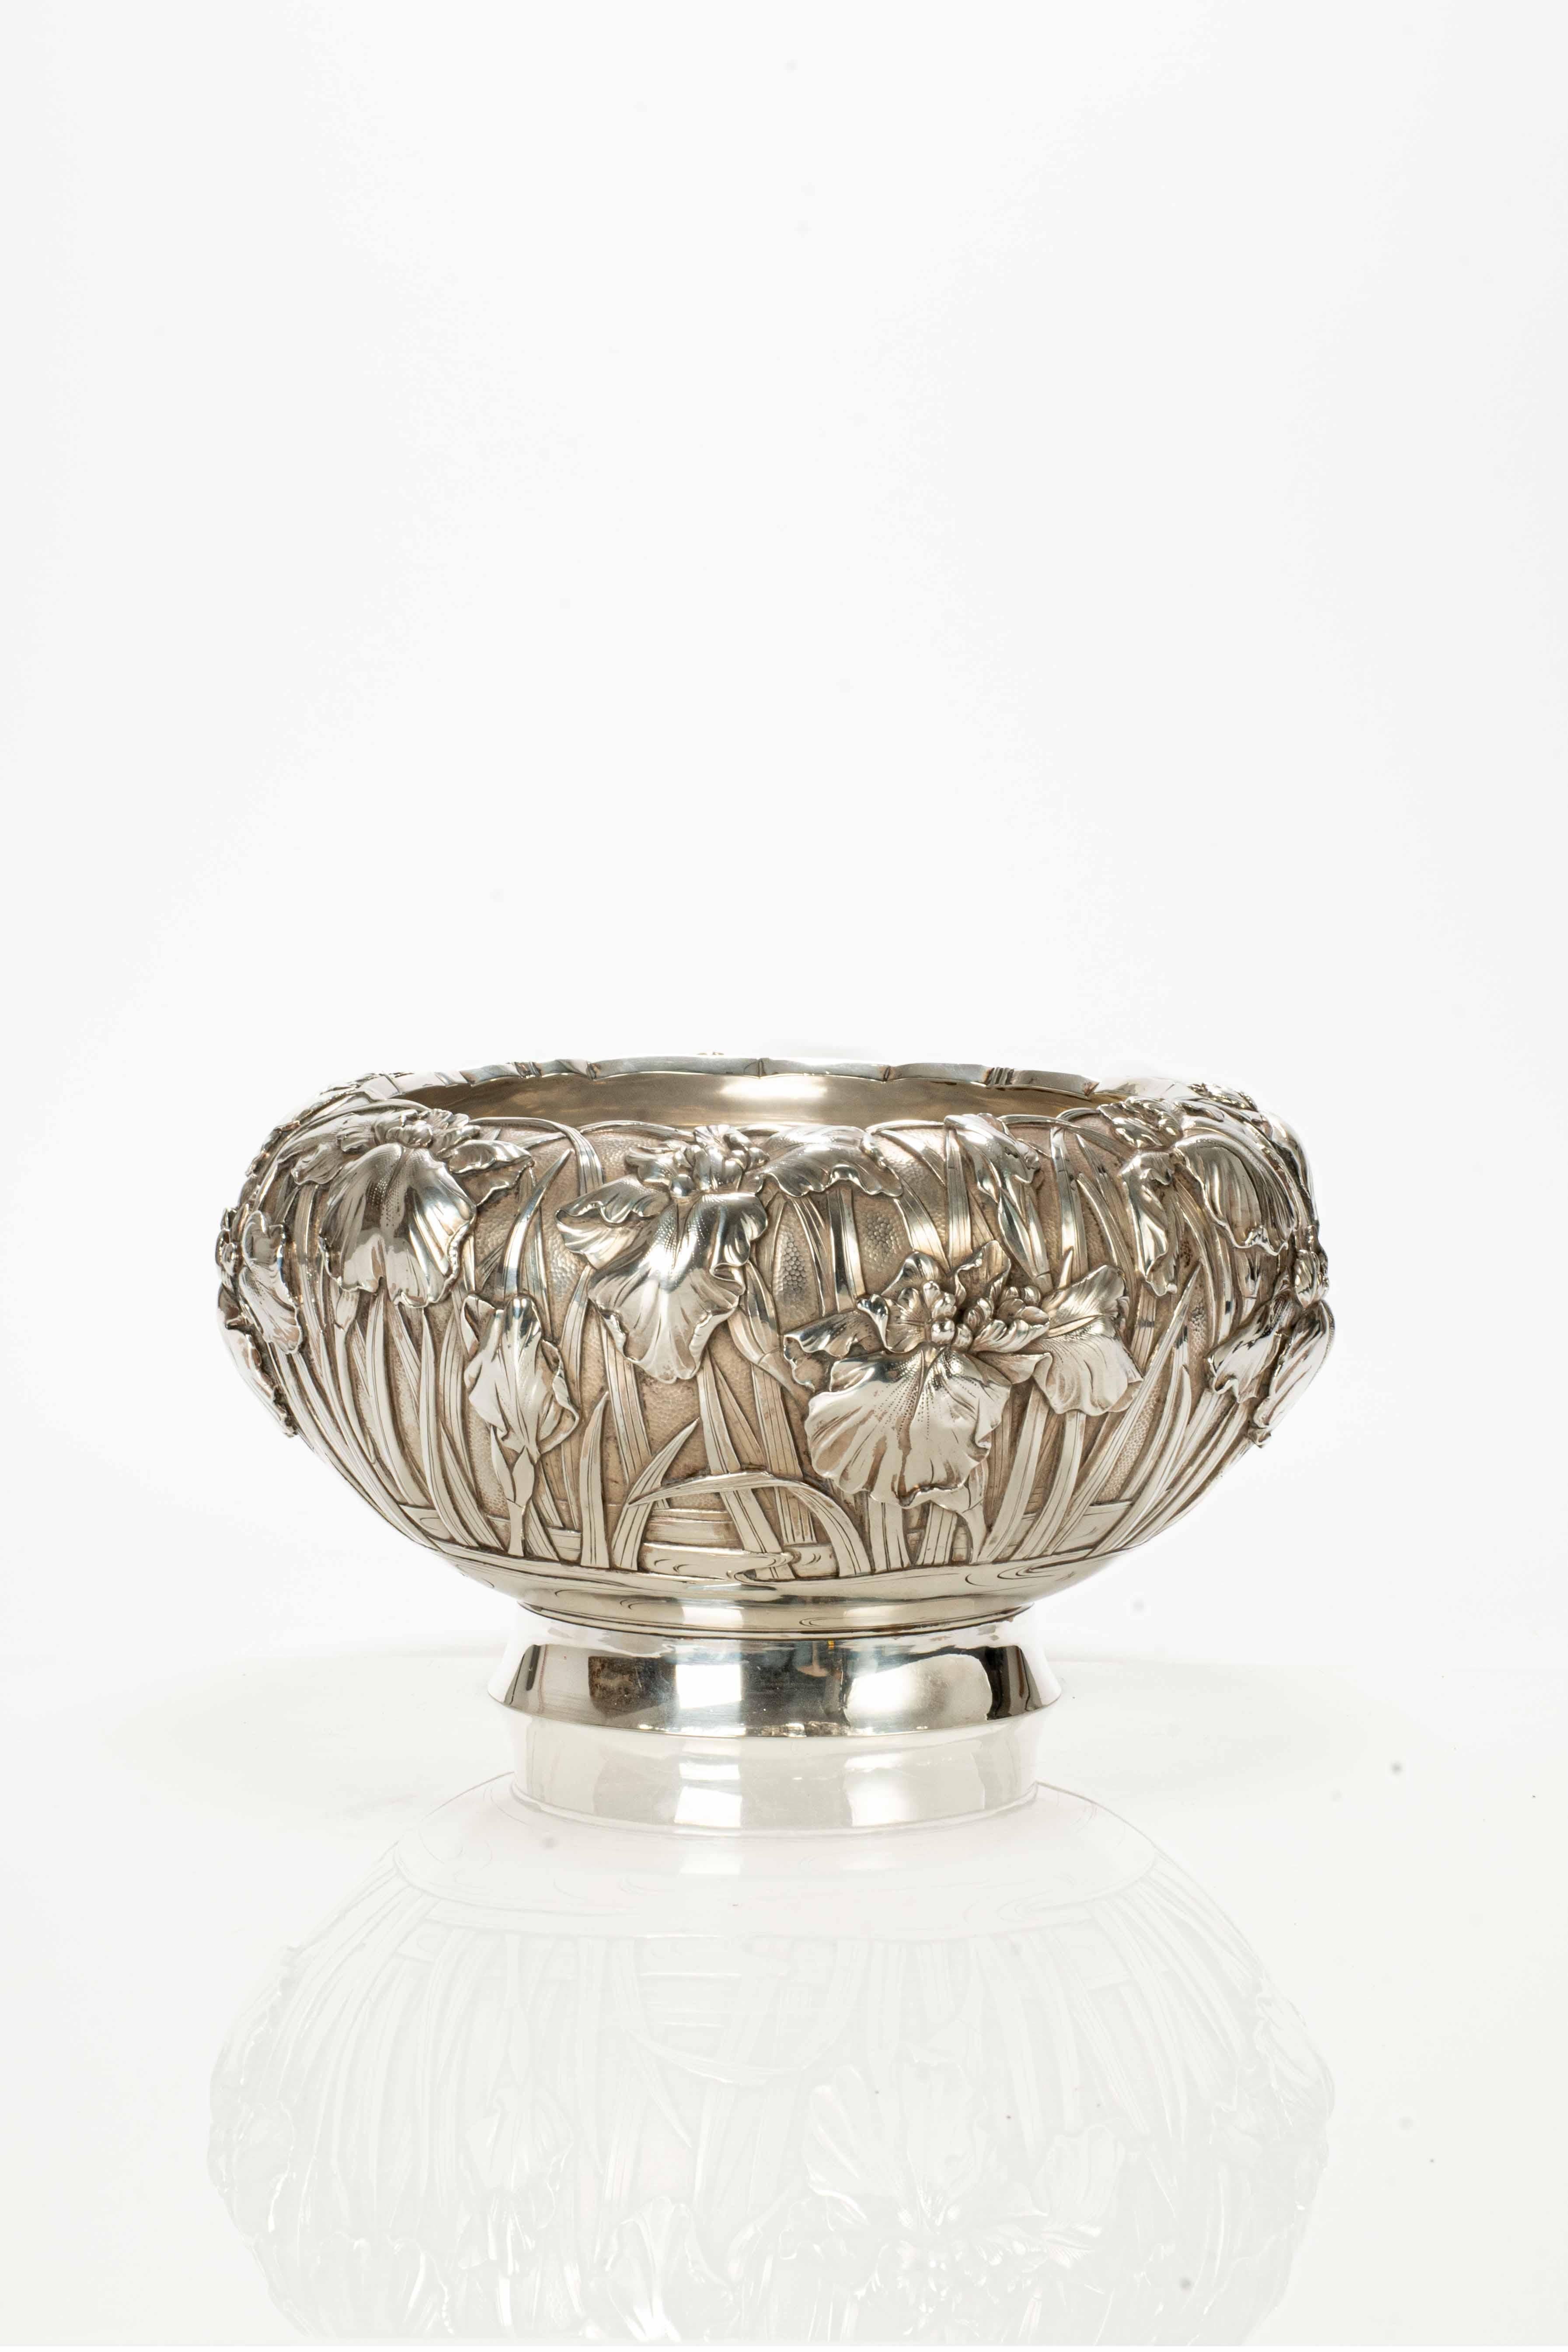 Refined silver bowl with embossed irises cast and chiseled inside on a hand-hammered ground on the bulbous body, raised on an oval foot.

Signature engraved under the base Watanabe zo and Junjin.

Origin: Japan

Period: Meiji end of 19th